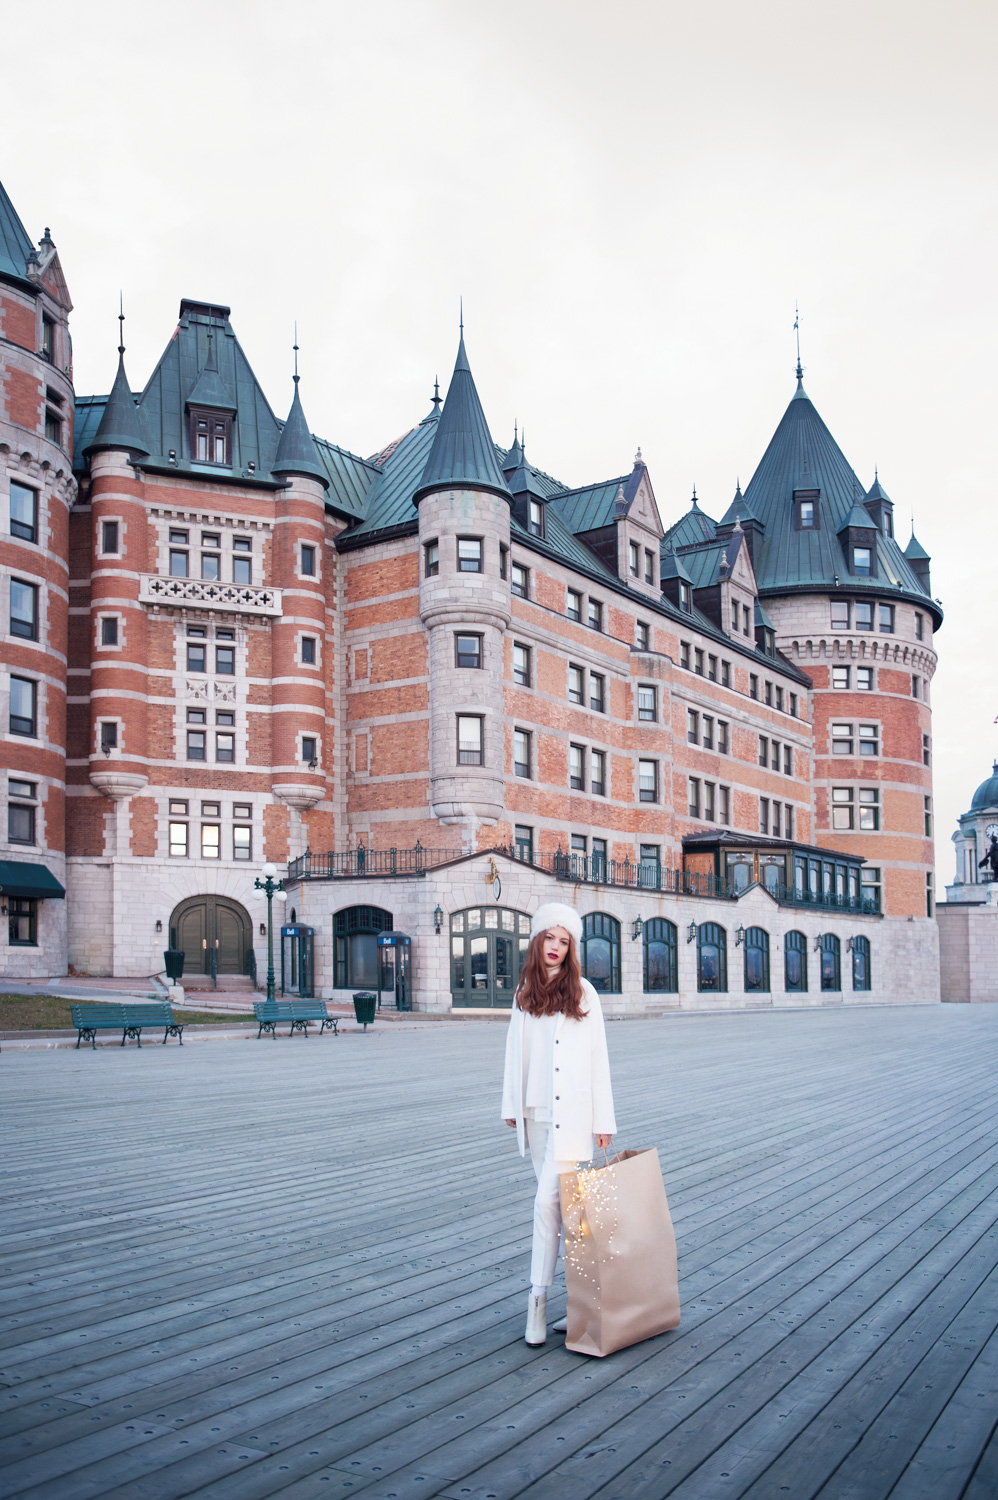 A woman in all white holding a bag outside of castle-looking building